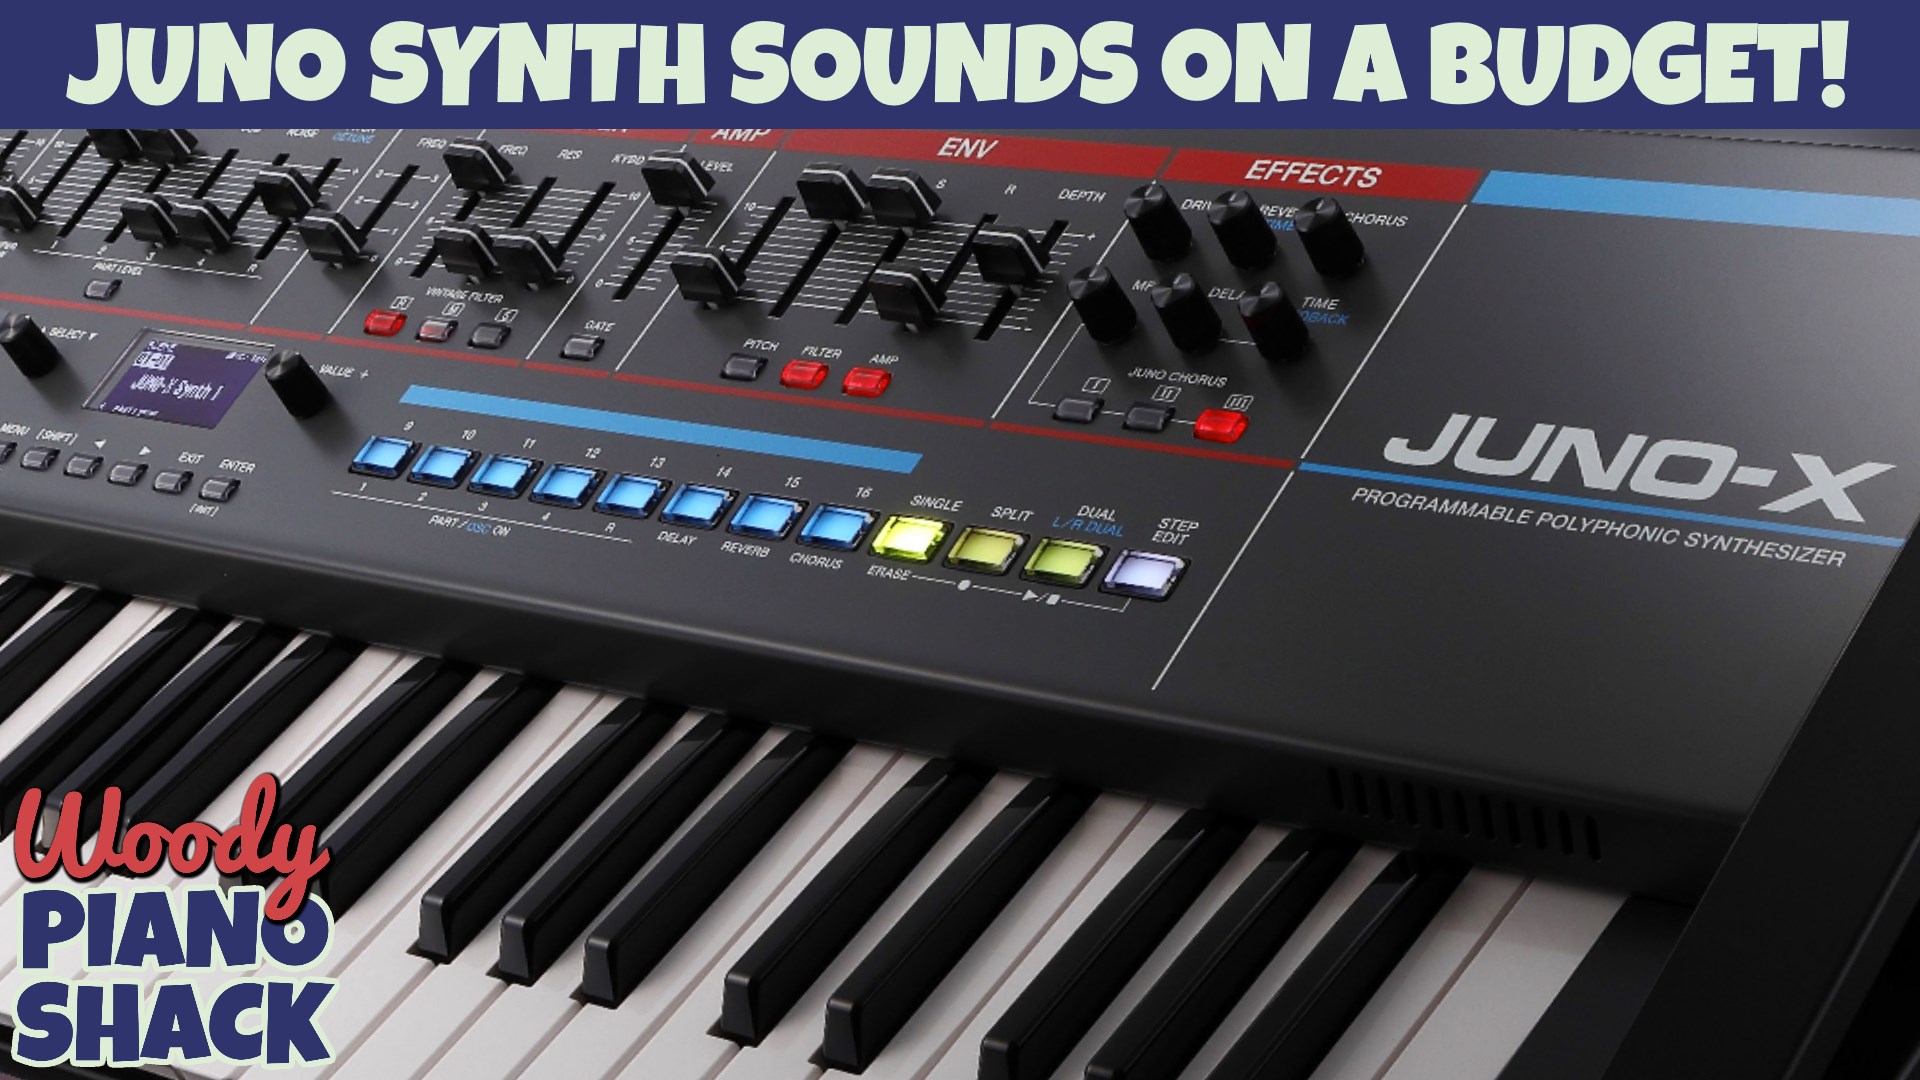 Four Cheap Alternatives to the New ROLAND JUNO-X